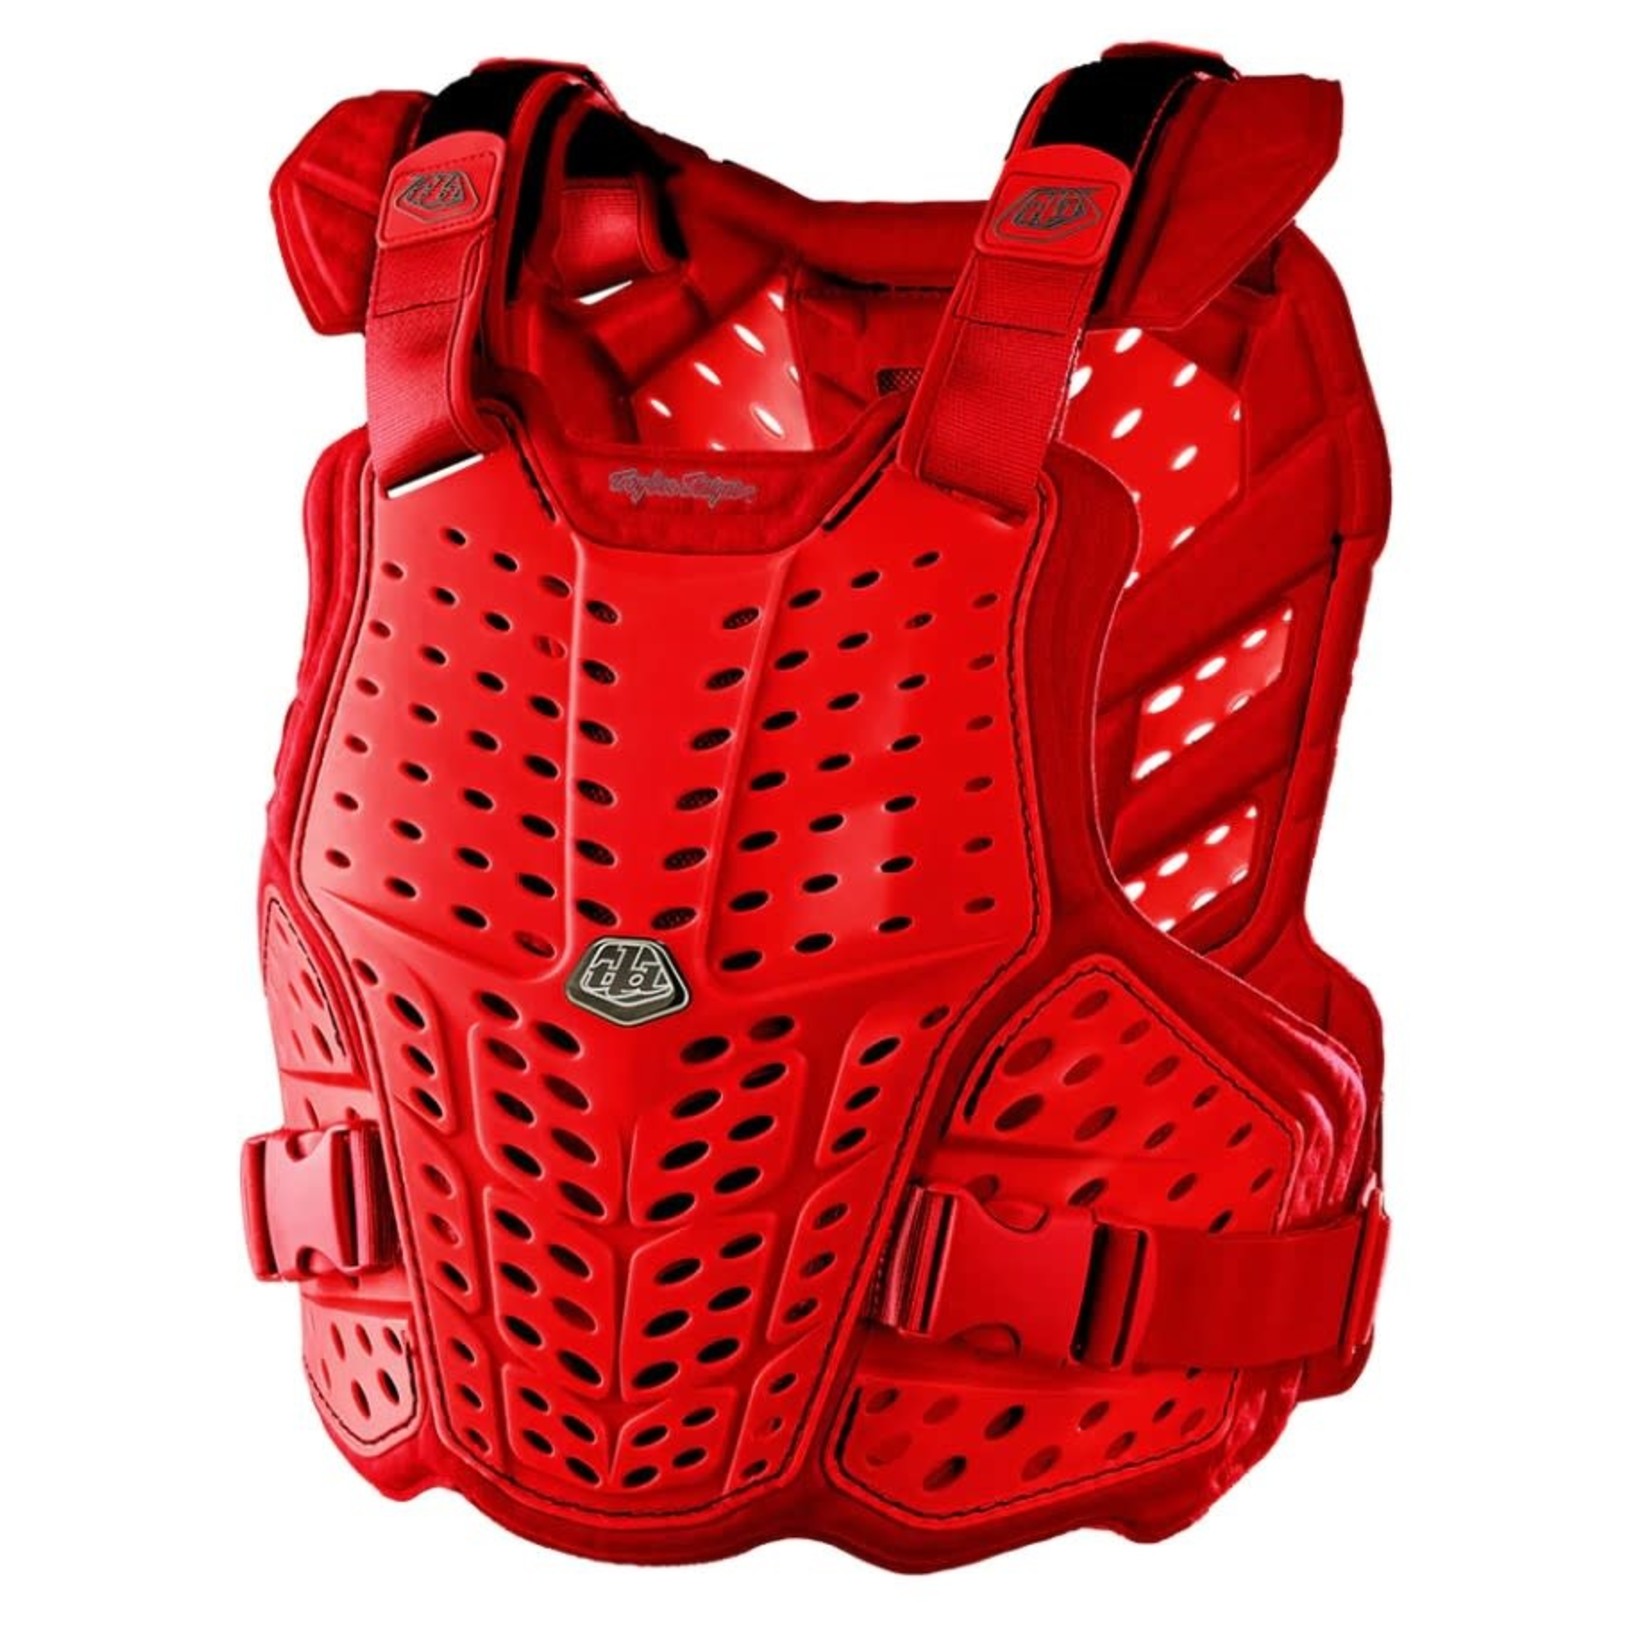 TROY LEE DESIGNS ROCKFIGHT CHEST PROTECTOR